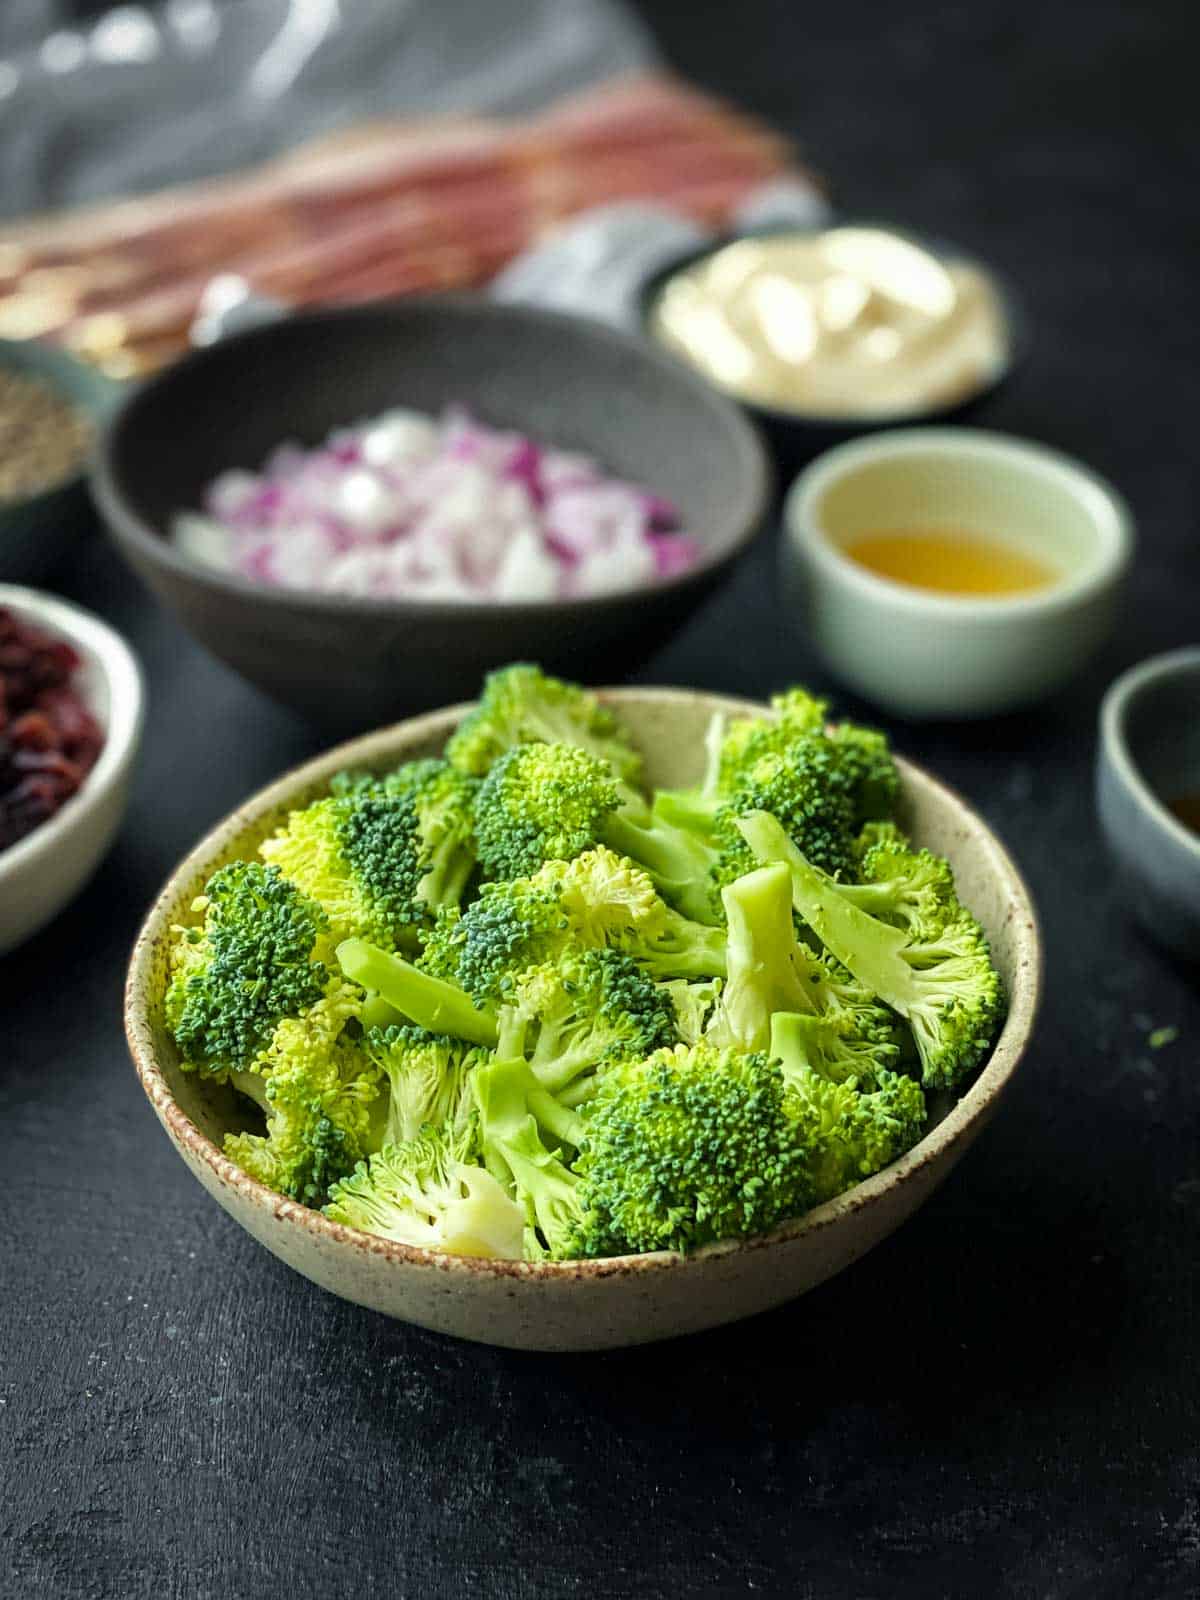 a small bowl of cut broccoli florets in the front with various smaller bowls behind with other broccoli salad ingredients.